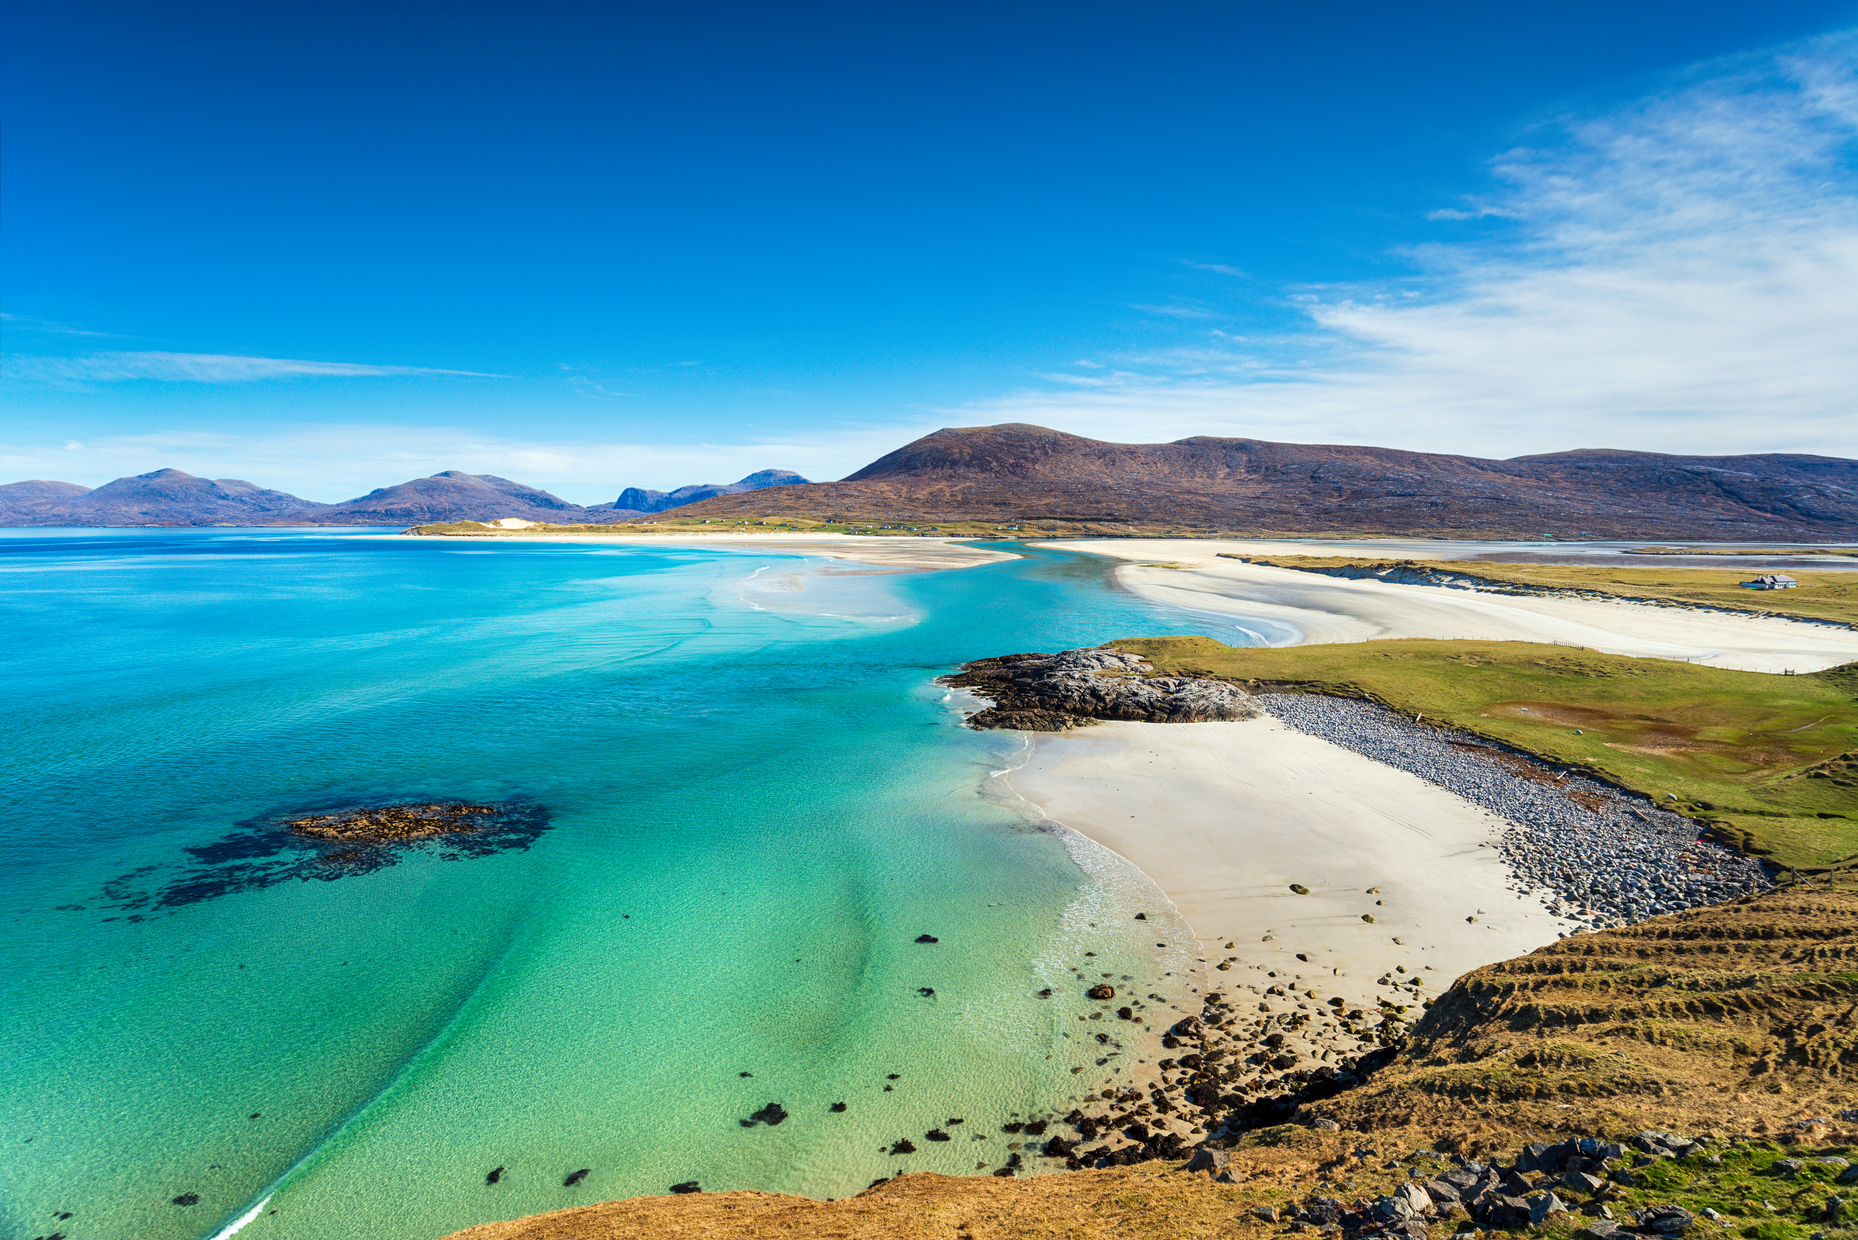 In the heart of the <a href="https://explore-harris.com/" rel="noreferrer noopener">Outer Hebrides</a>, the Isle of Harris is home to spectacular scenery bordering the Atlantic Ocean. Among its many white sandy beaches, Luskentyre and <a href="https://www.visitscotland.com/info/see-do/traigh-seilebost-p2571581" rel="noreferrer noopener">Seilebost</a> offer splendid mountain views, turquoise waters, and green pastures. This island paradise is perfect for windsurfing.